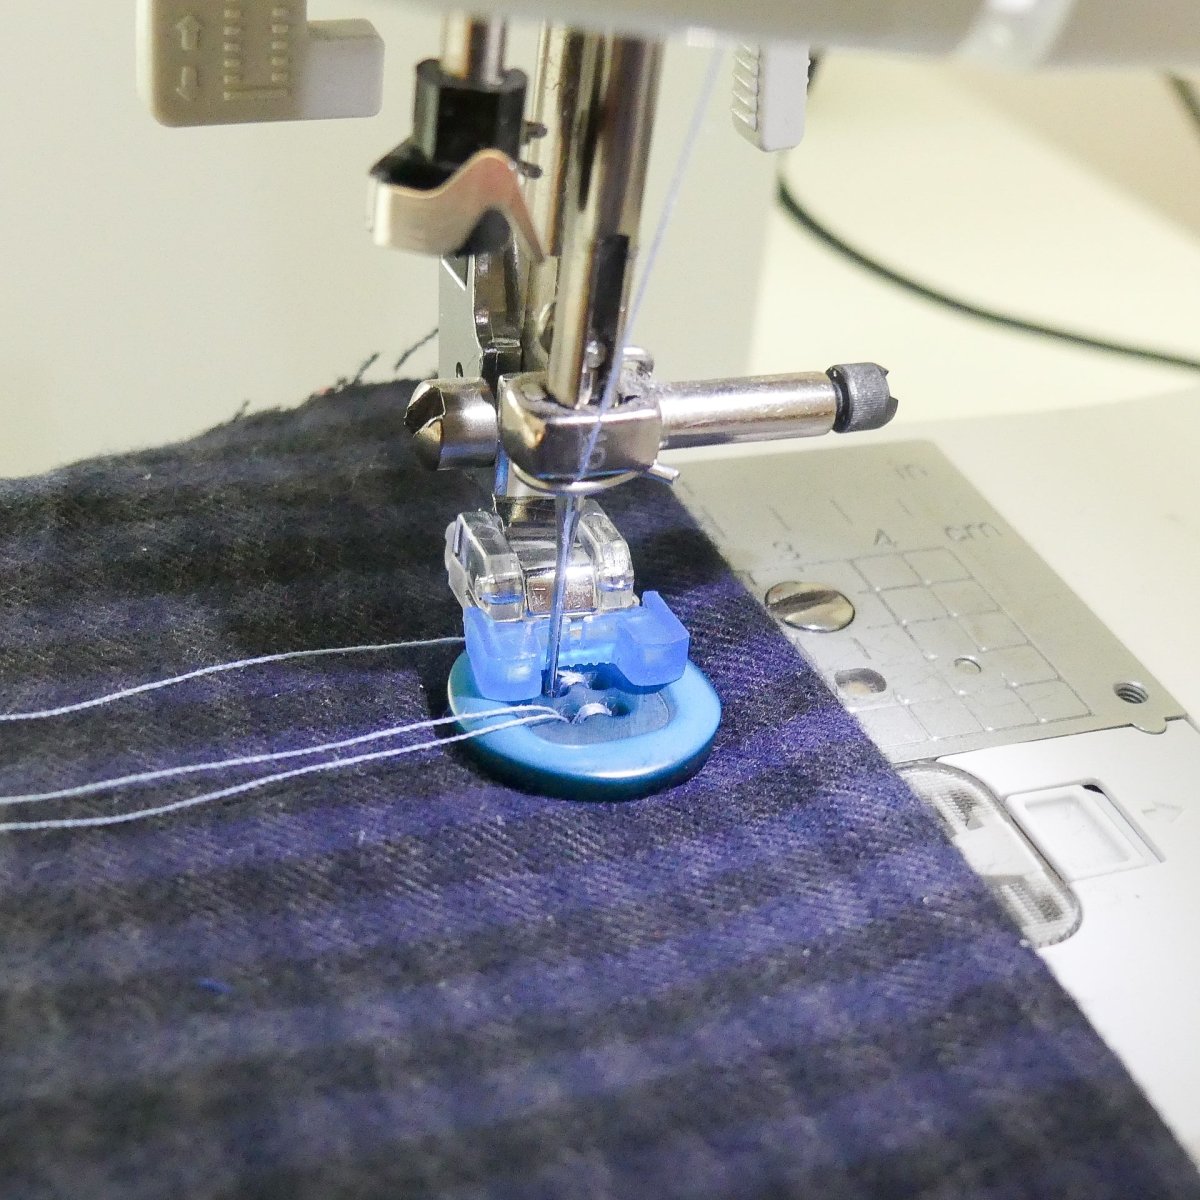 A sewing machine attachment sewing on a blue button on a garment, sewing machine close-up